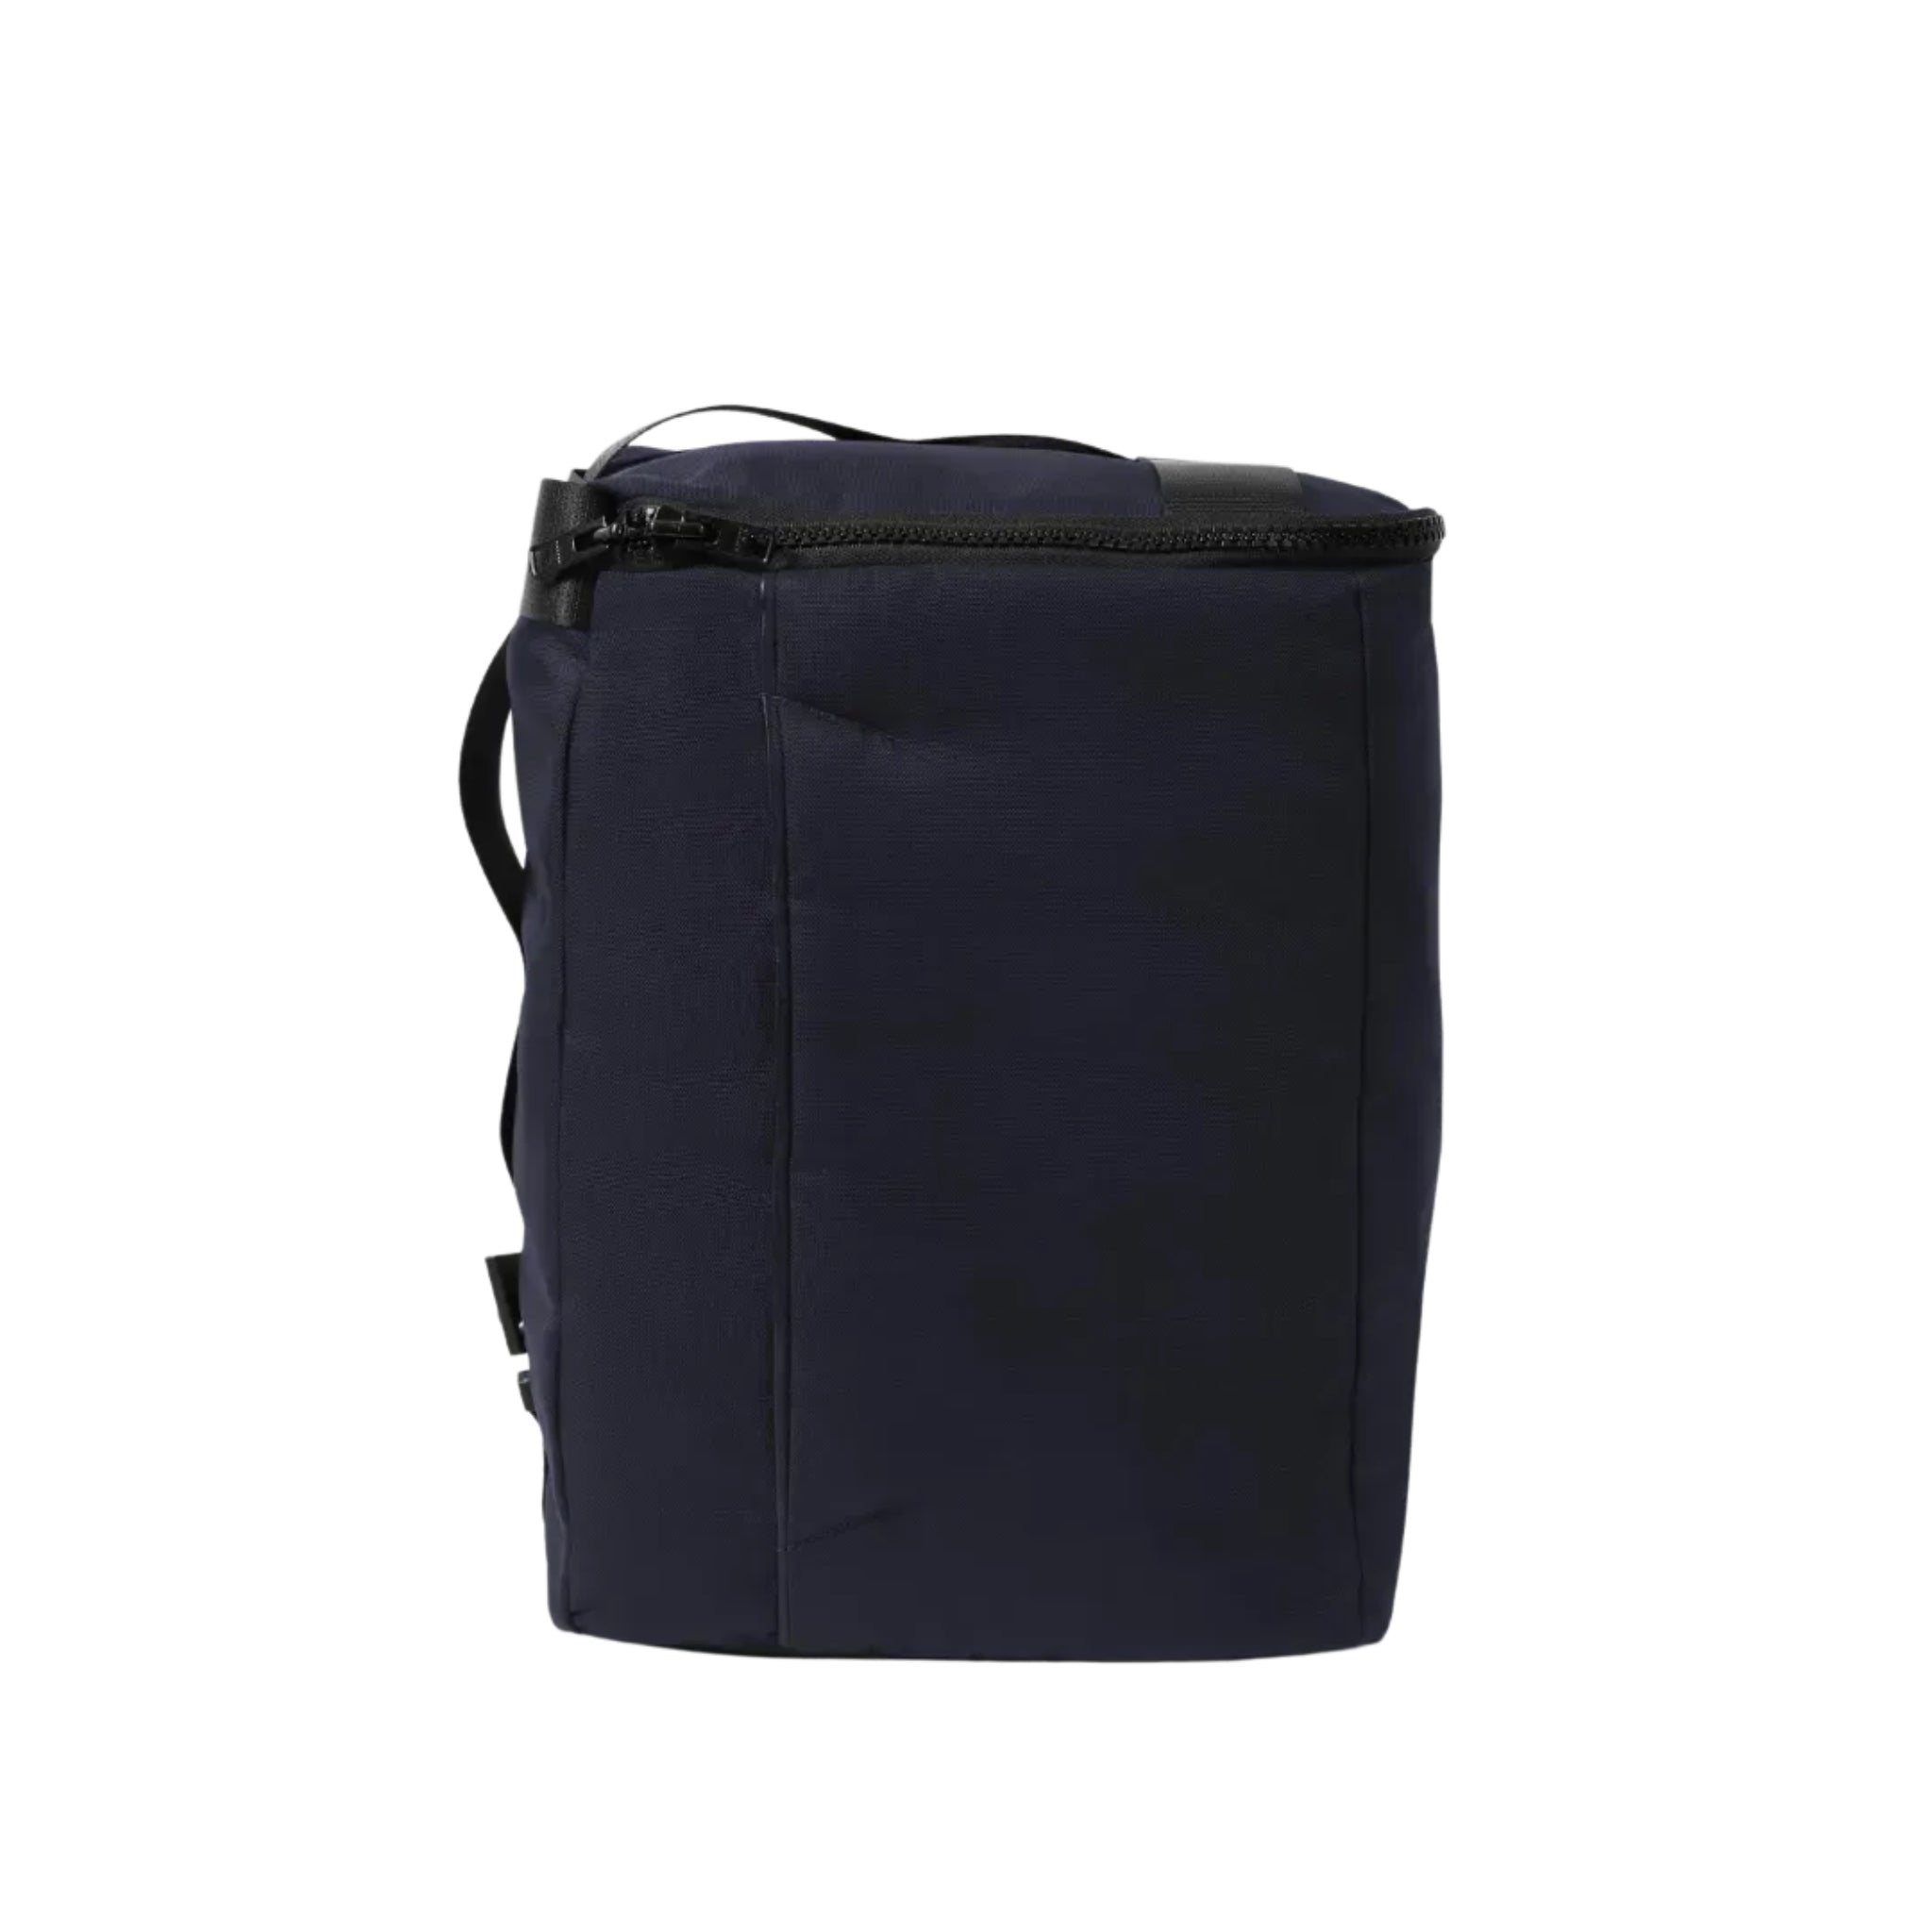 Interesting rectangular shaped backpack in navy upcycled material on a white background.